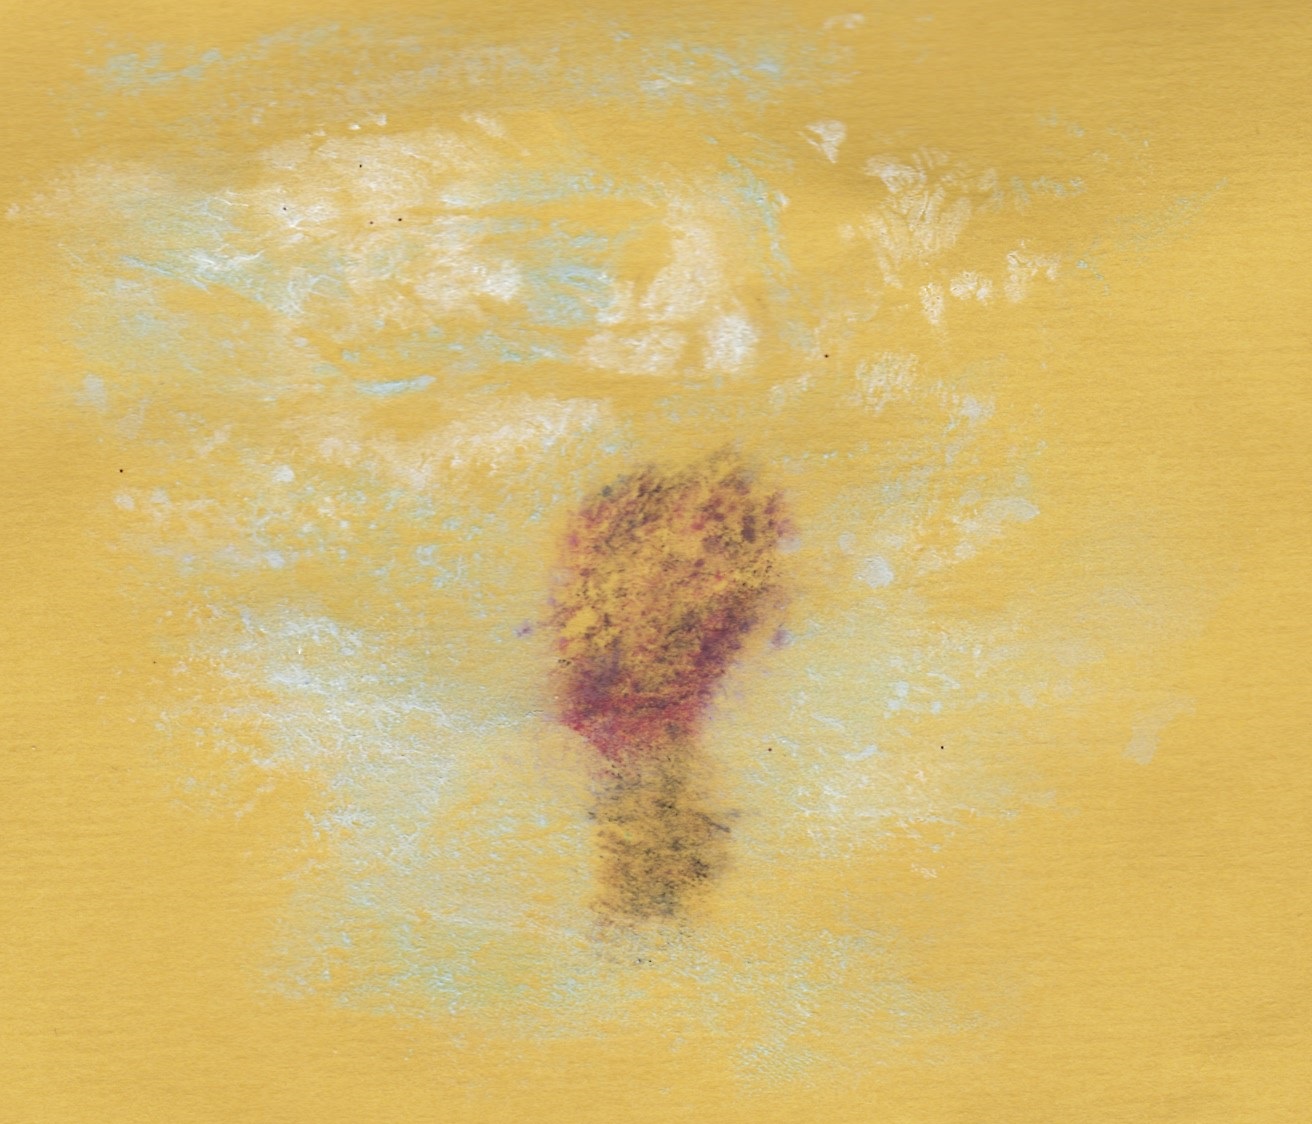 Scan of labia painted as hot air balloon among the clouds